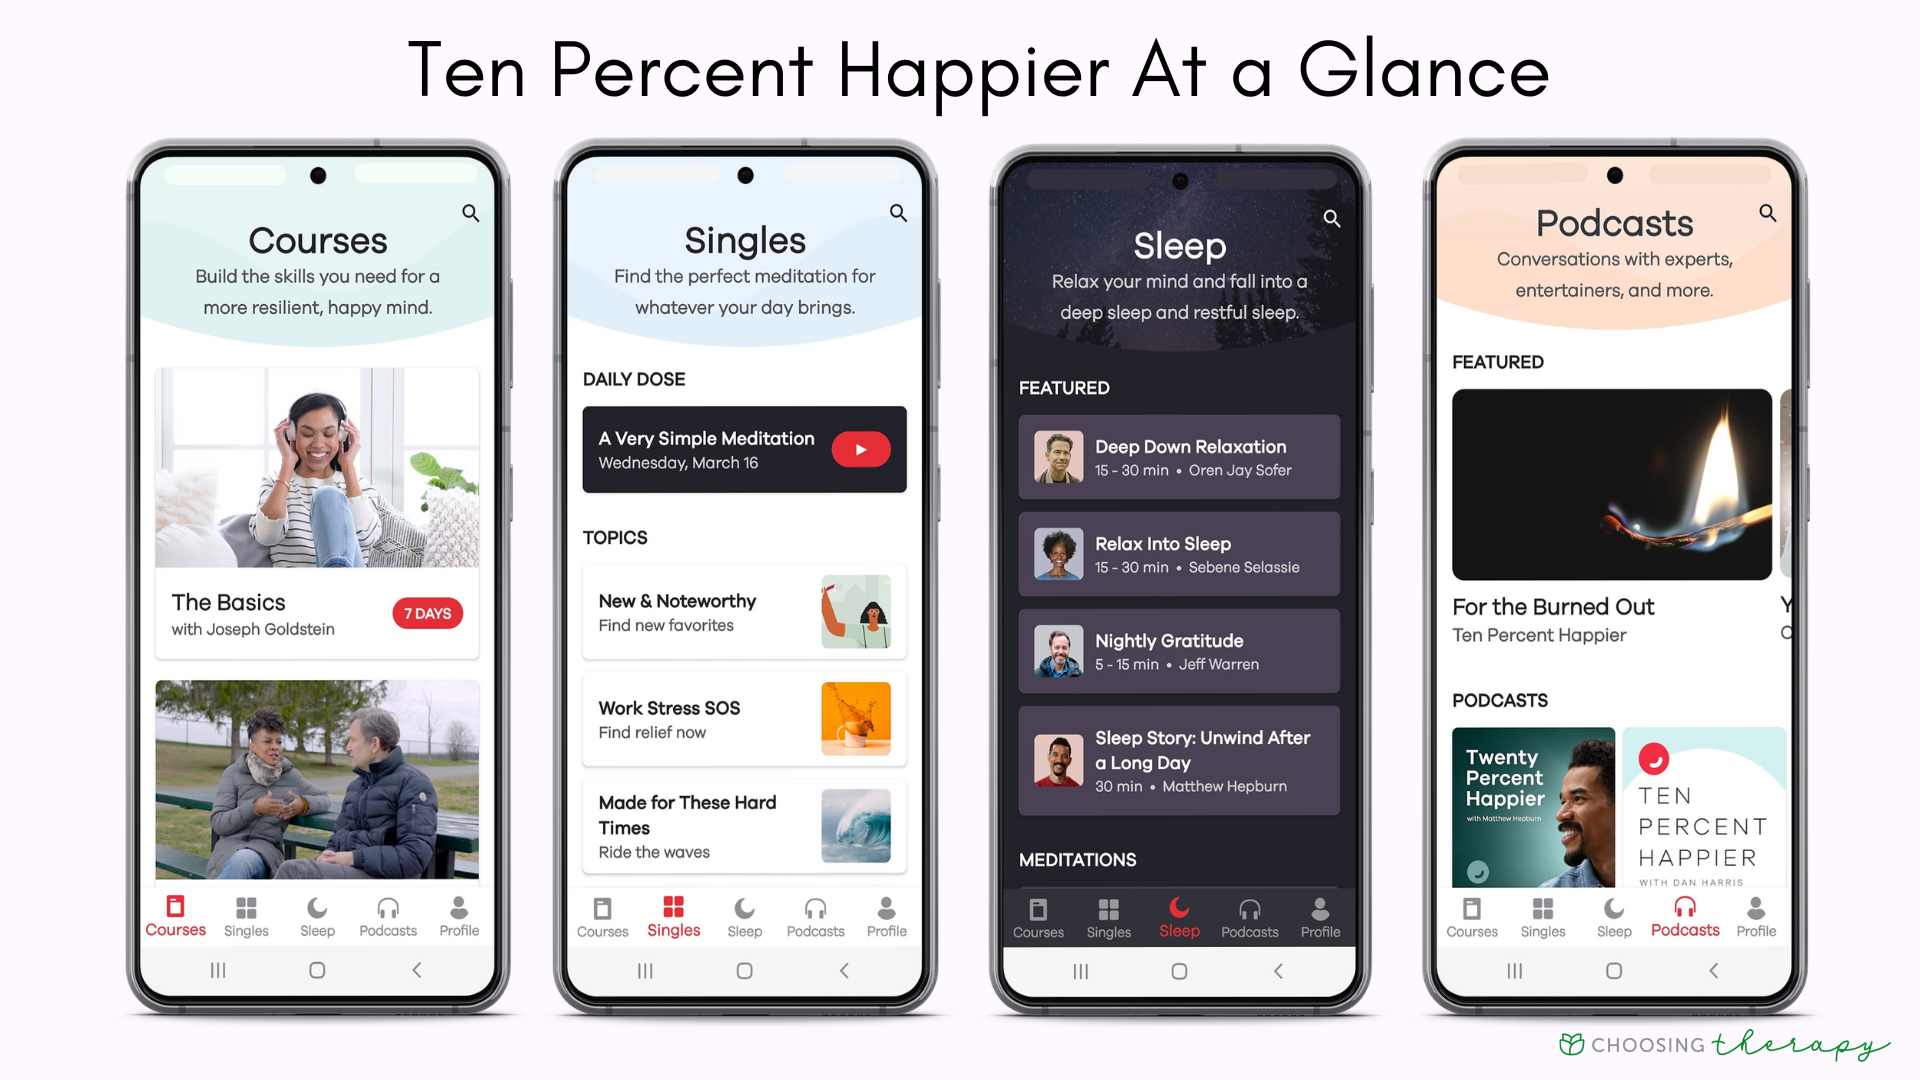 Ten Percent Happier Review 2022 - Image of the key features of the Ten Percent Happier App, meditation courses, single meditation sessions, sleep meditations, and podcasts